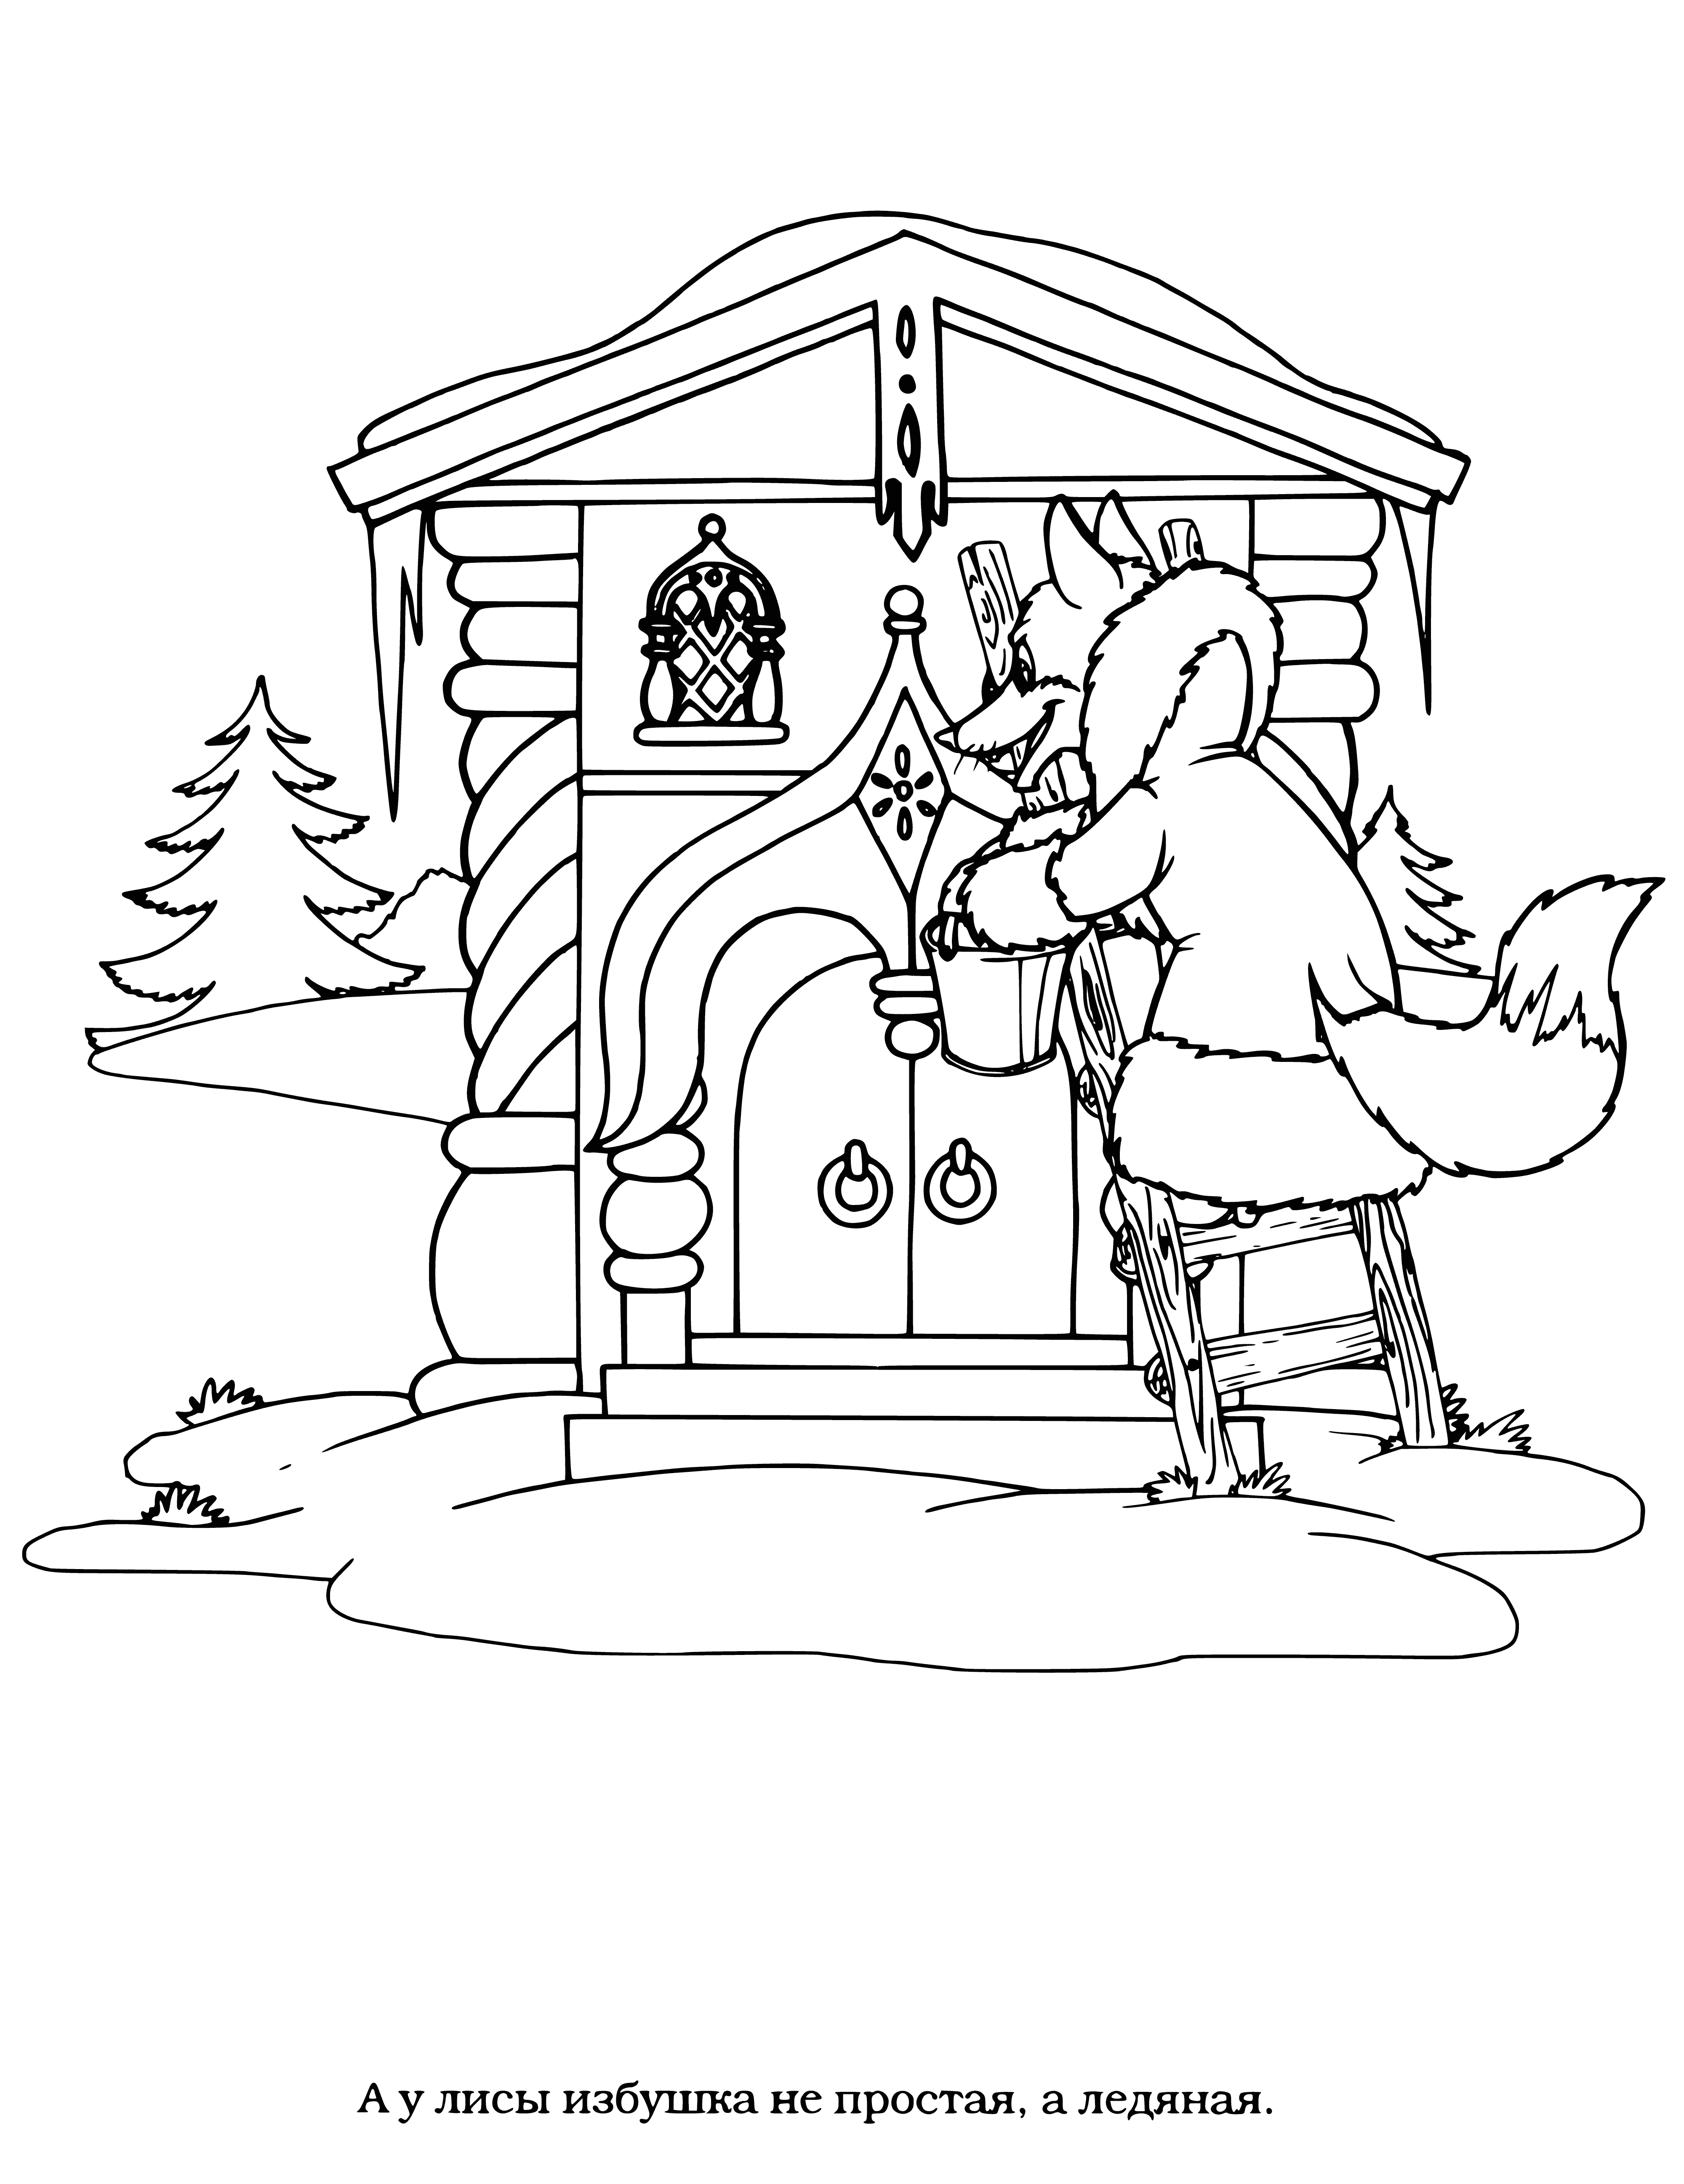 coloring page: Young man ice fishing, sitting in an ice hut with a line, lure and bucket in tow.